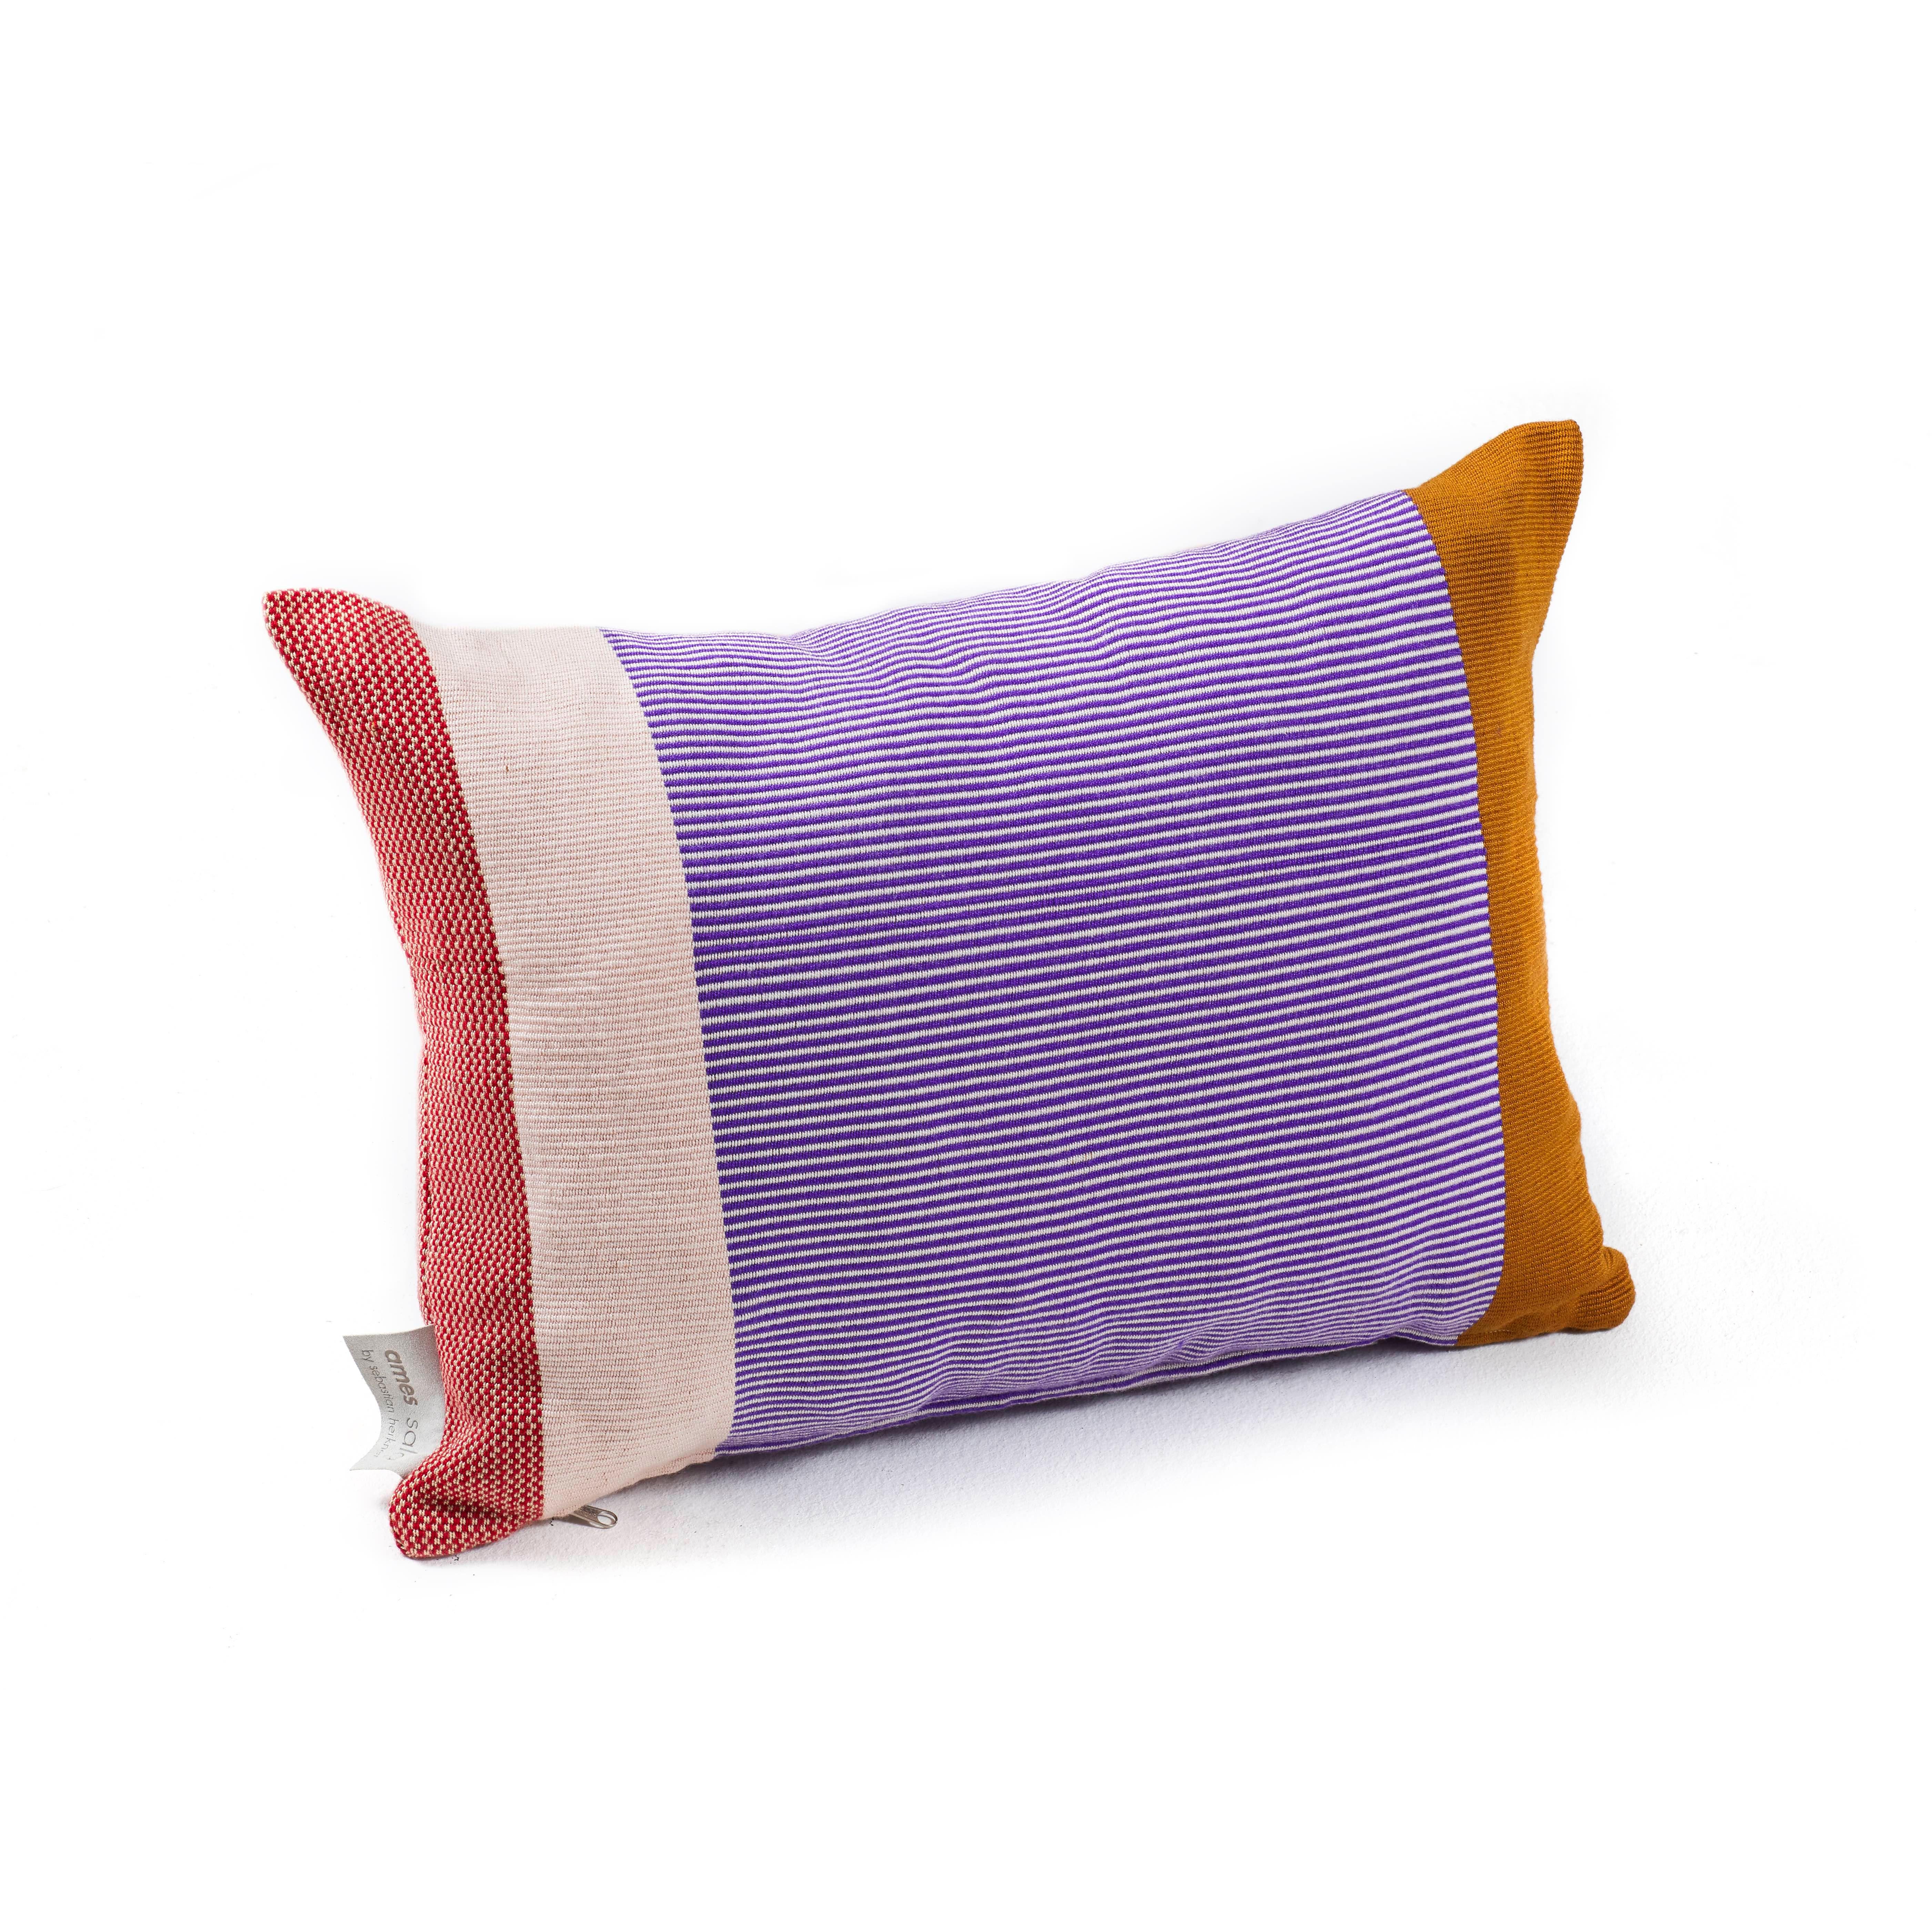 Maraca pillow 2 by Sebastian Herkner
Materials: 100% cotton. 
Technique: Hand-woven in Colombia. 
Dimensions: W 60 x H 40 cm 
Available in colors: green / purple / red, orange / gold / red, gold / purple / red. 

With their strong